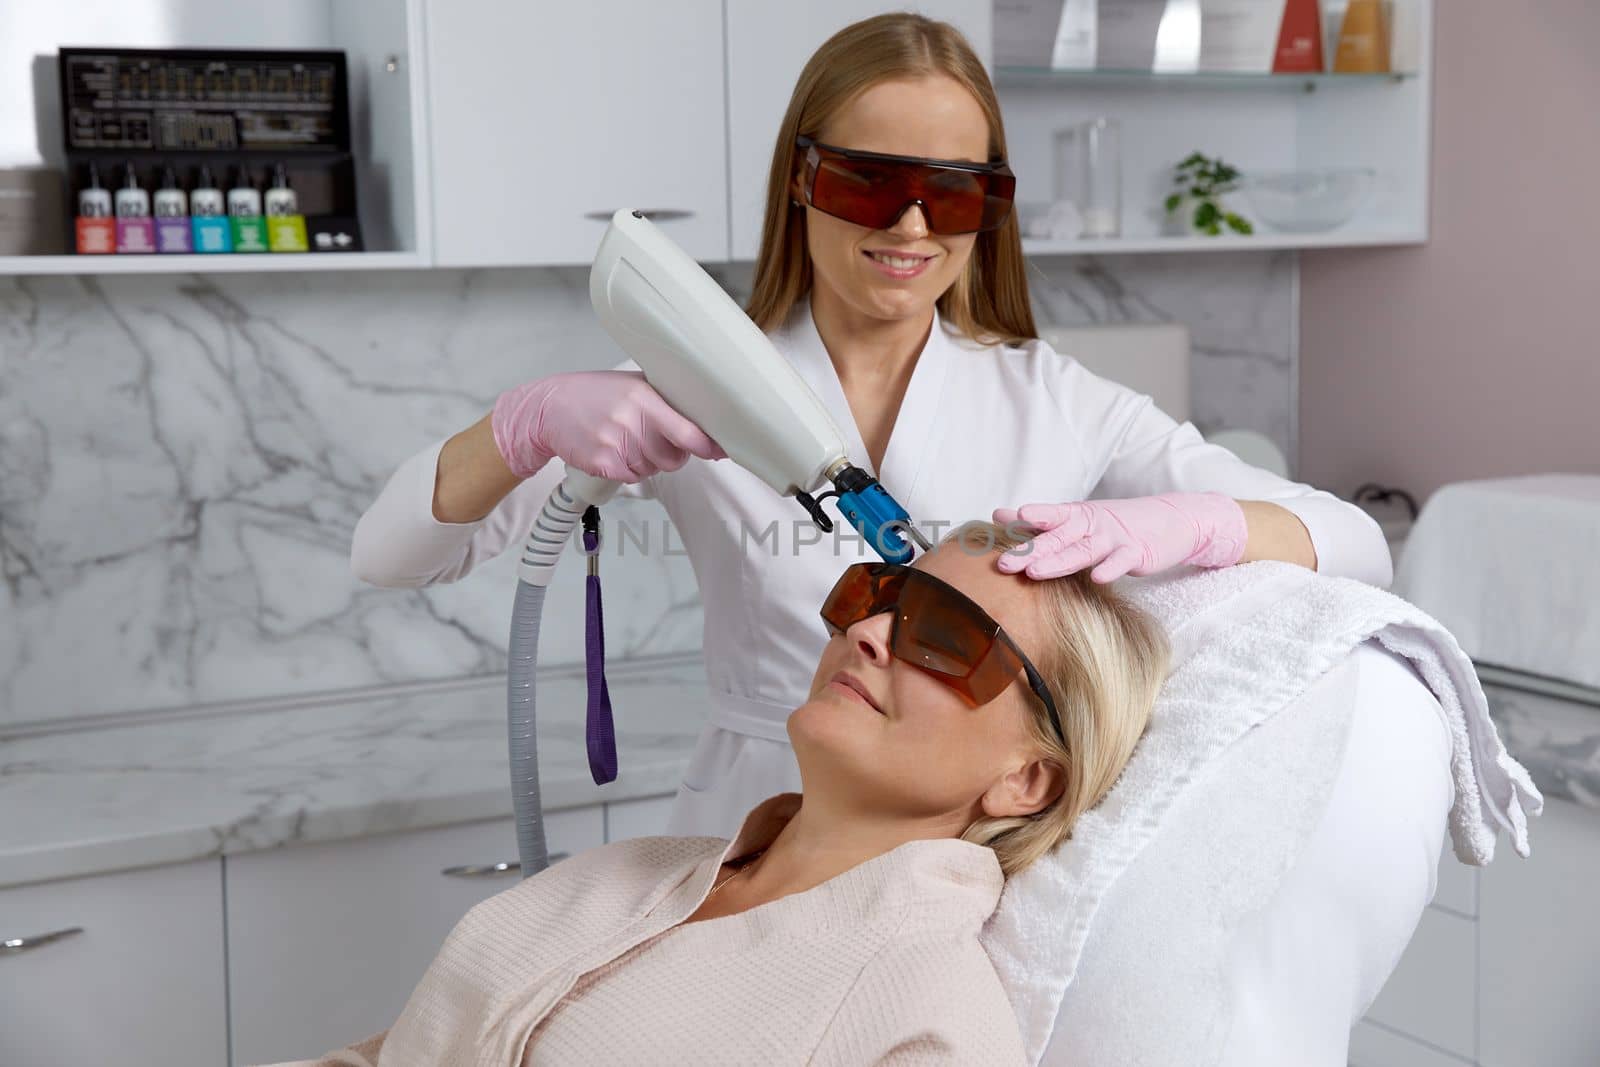 Woman receiving laser treatment in modern cosmetology clinic by Mariakray